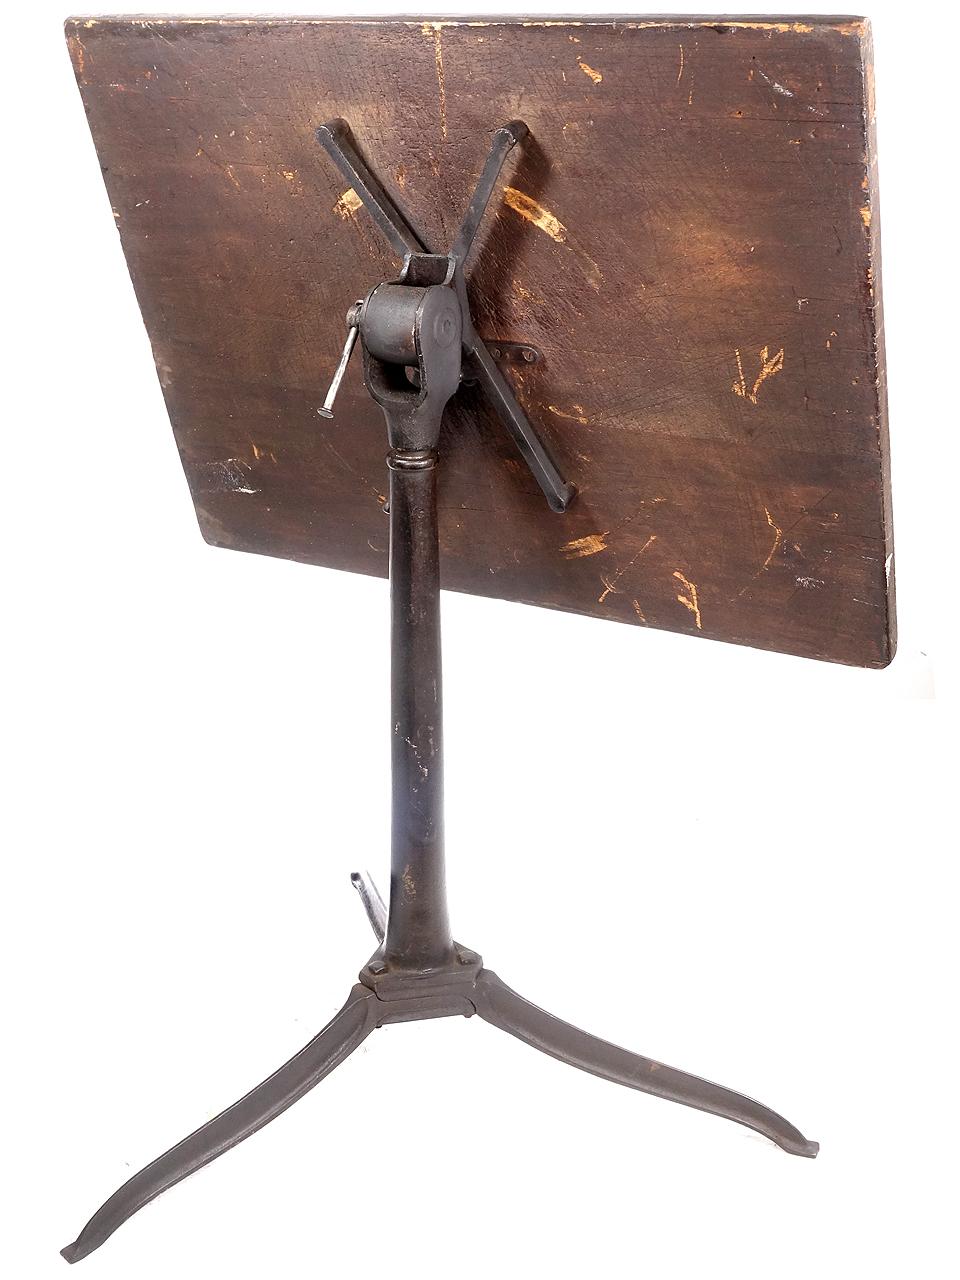 This 1920s drafting or art table is untouched. The finish on the wood and iron base is all original. It has an aged patina that is just right. The wood top is only 23 x 31 inches and is small enough to be used as a unique display stand. It will tilt